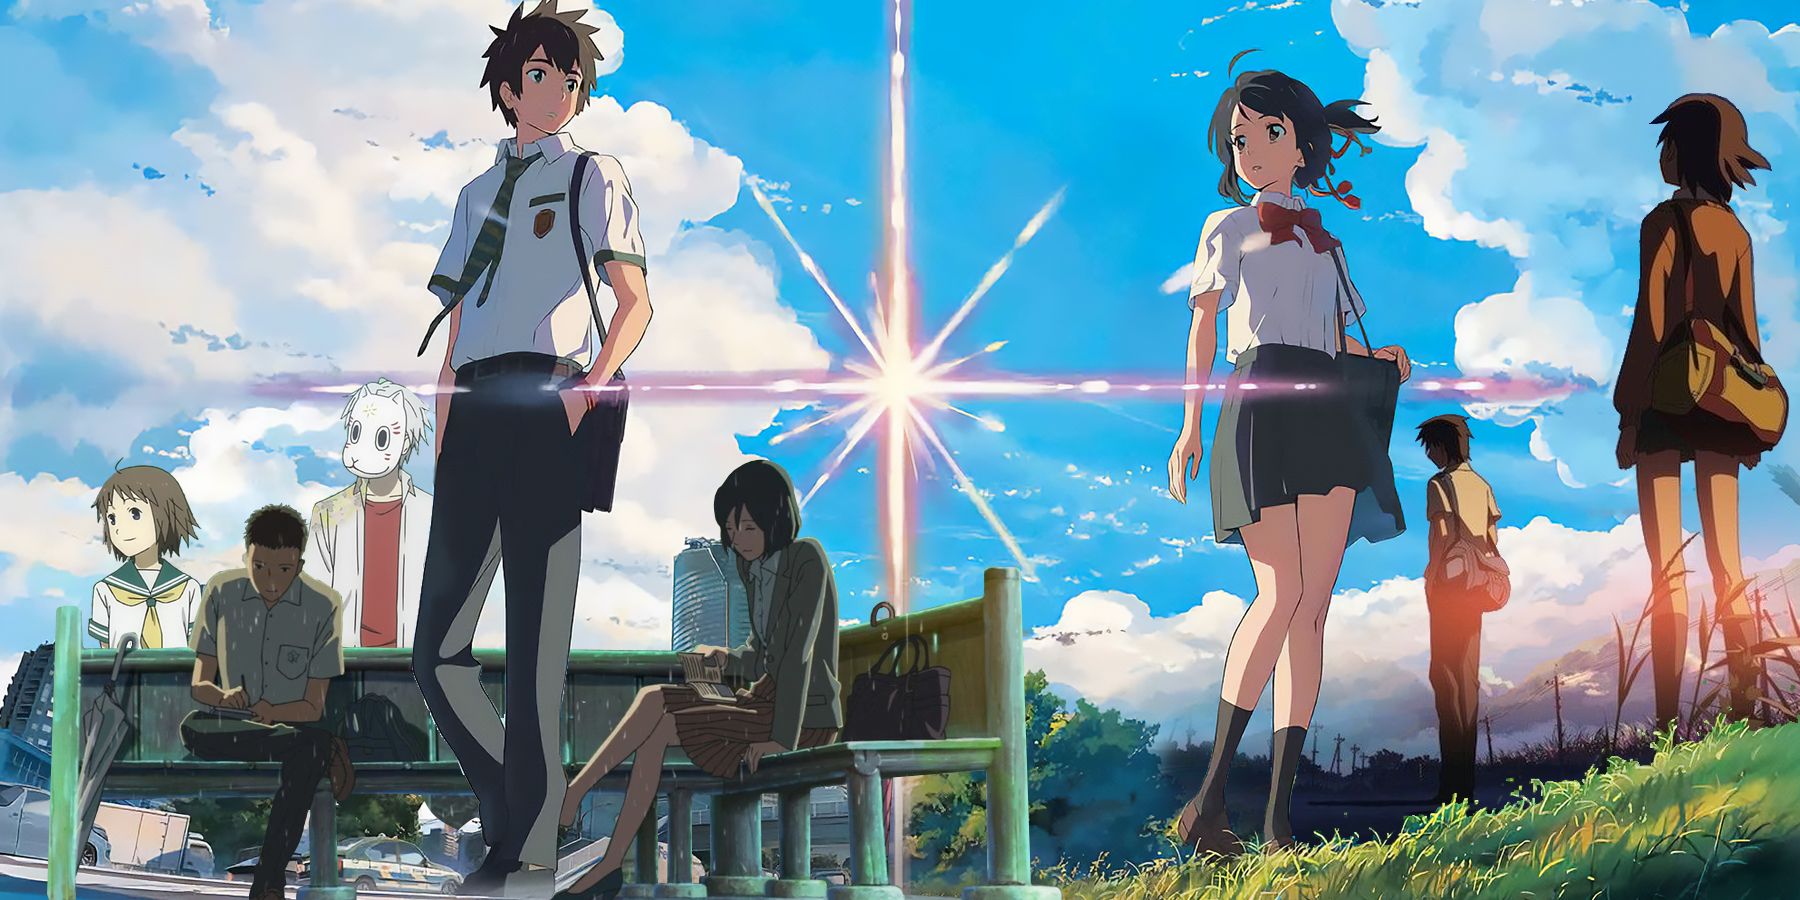 2023 Anime / Japanese Films Coming to U.S. Theaters & Online | Yatta-Tachi